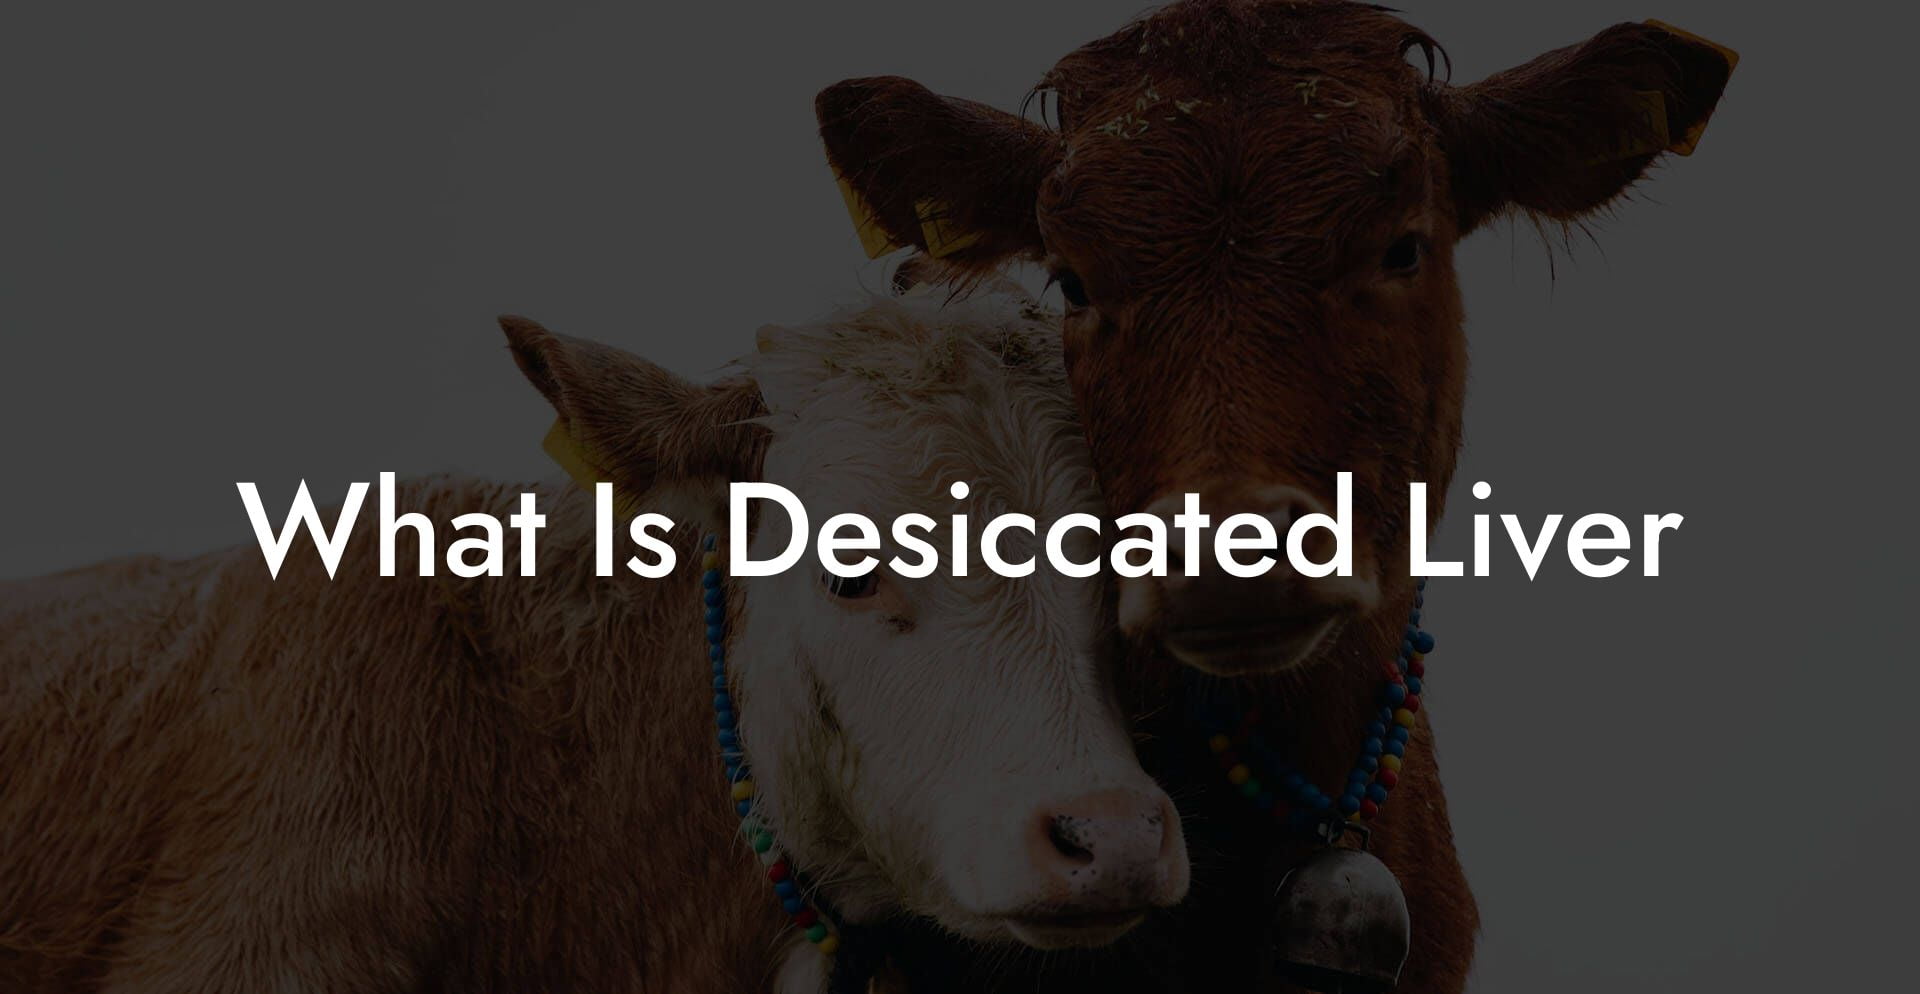 What Is Desiccated Liver